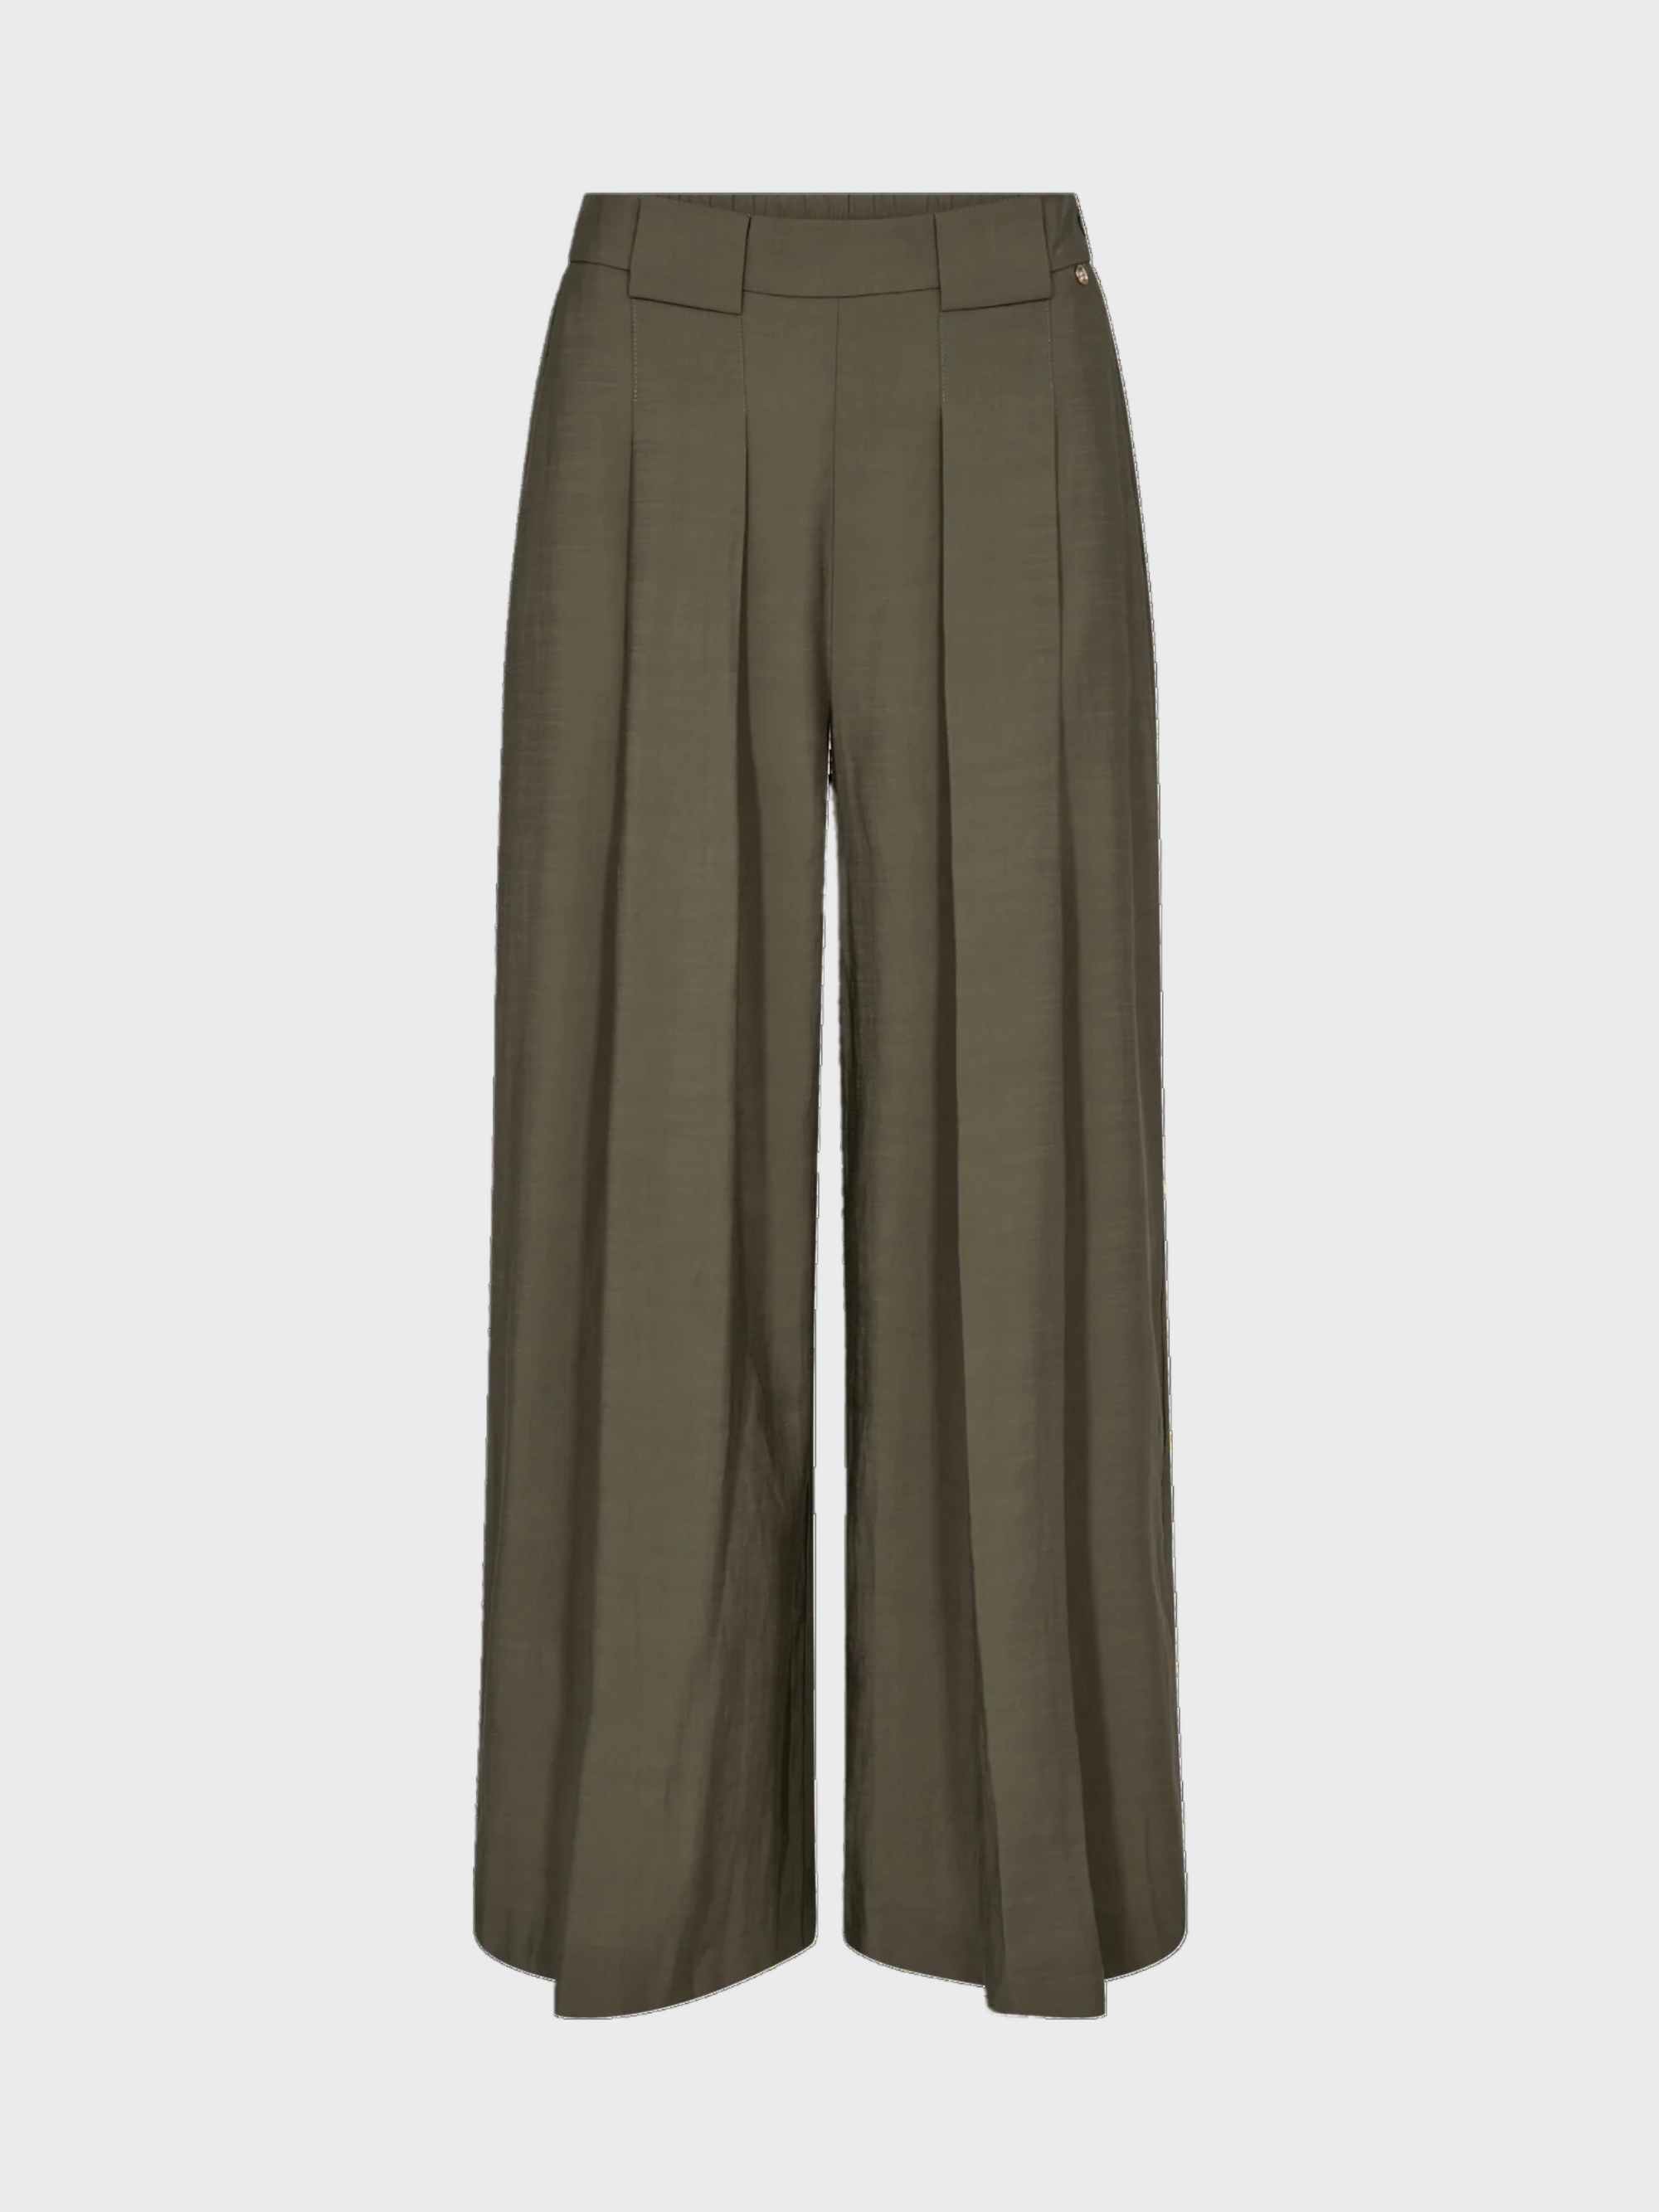 Mos Mosh Thea Eden Pant Dusty Olive-Pants-West of Woodward Boutique-Vancouver-Canada